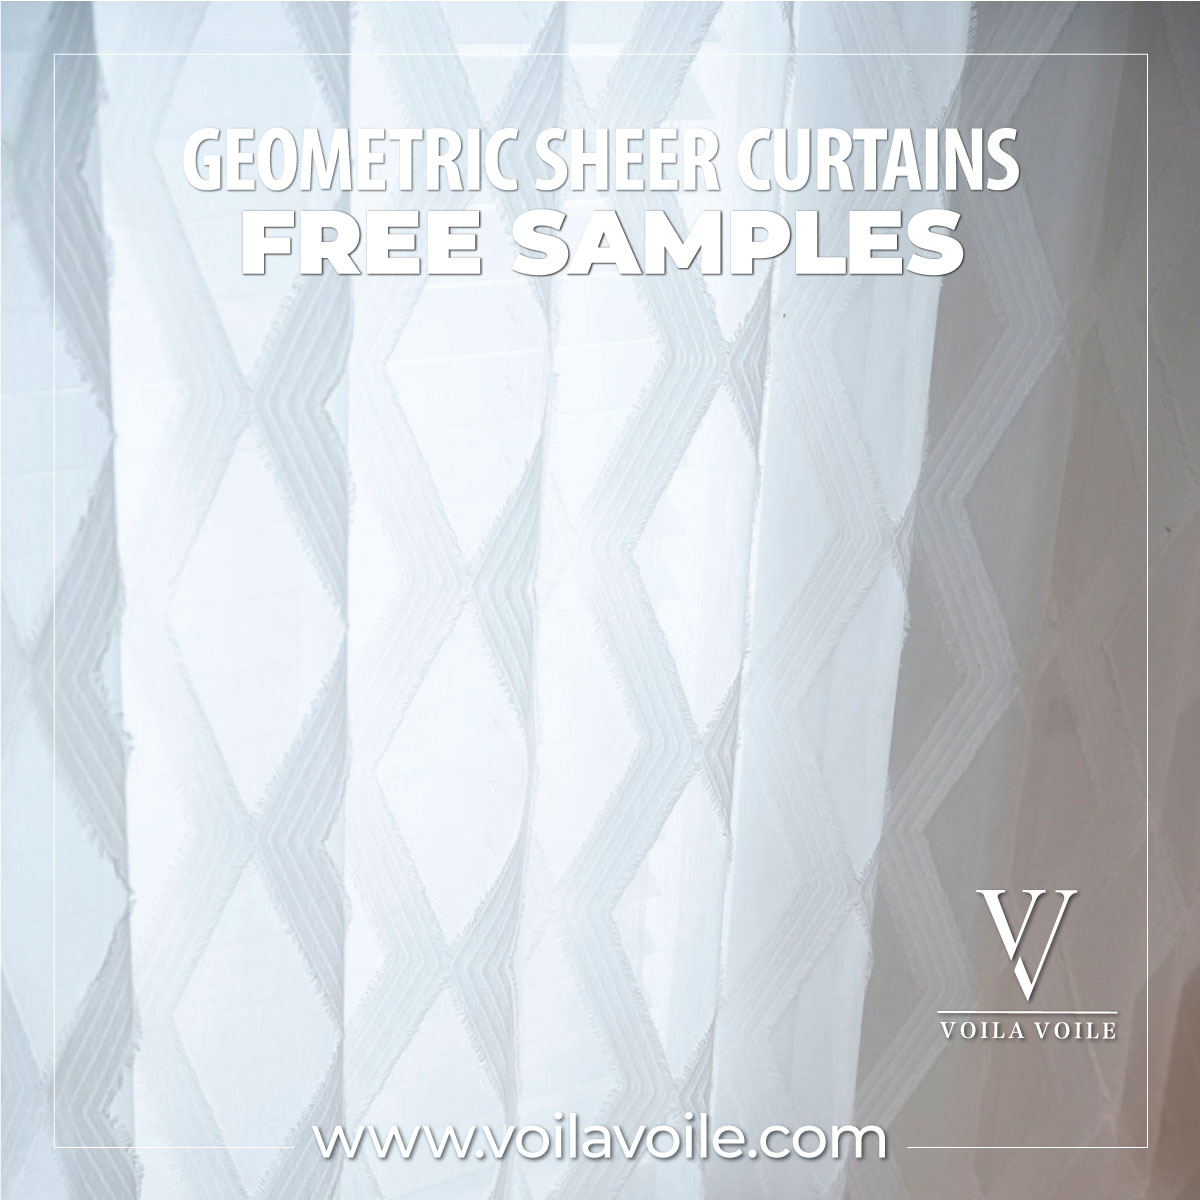 Elegance in Simplicity: Transform Your Space with White Sheer Curtains